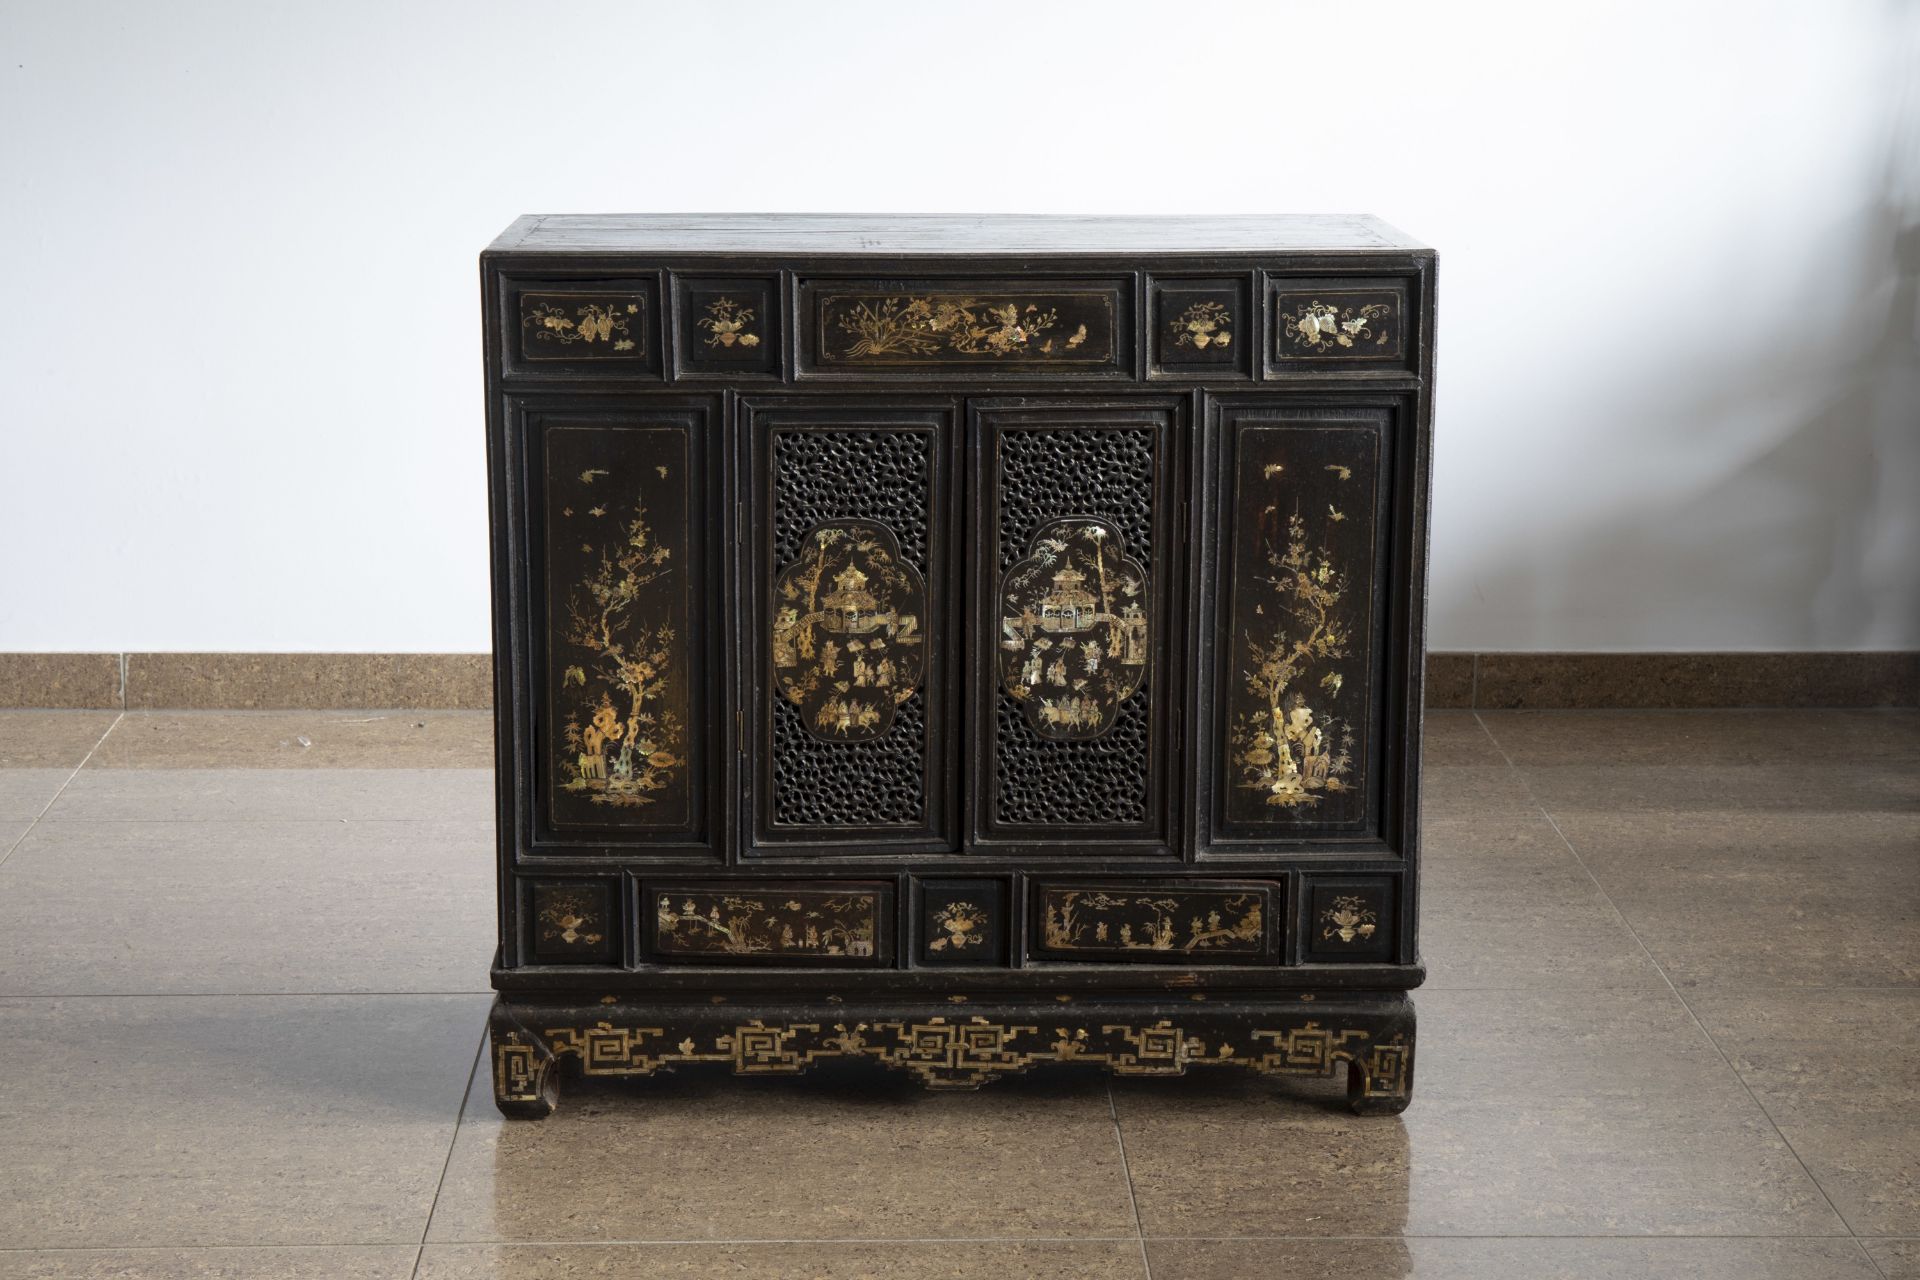 A Vietnamese mother-of-pearl inlaid wood two-door cabinet with figures in a palace garden and floral - Image 3 of 8